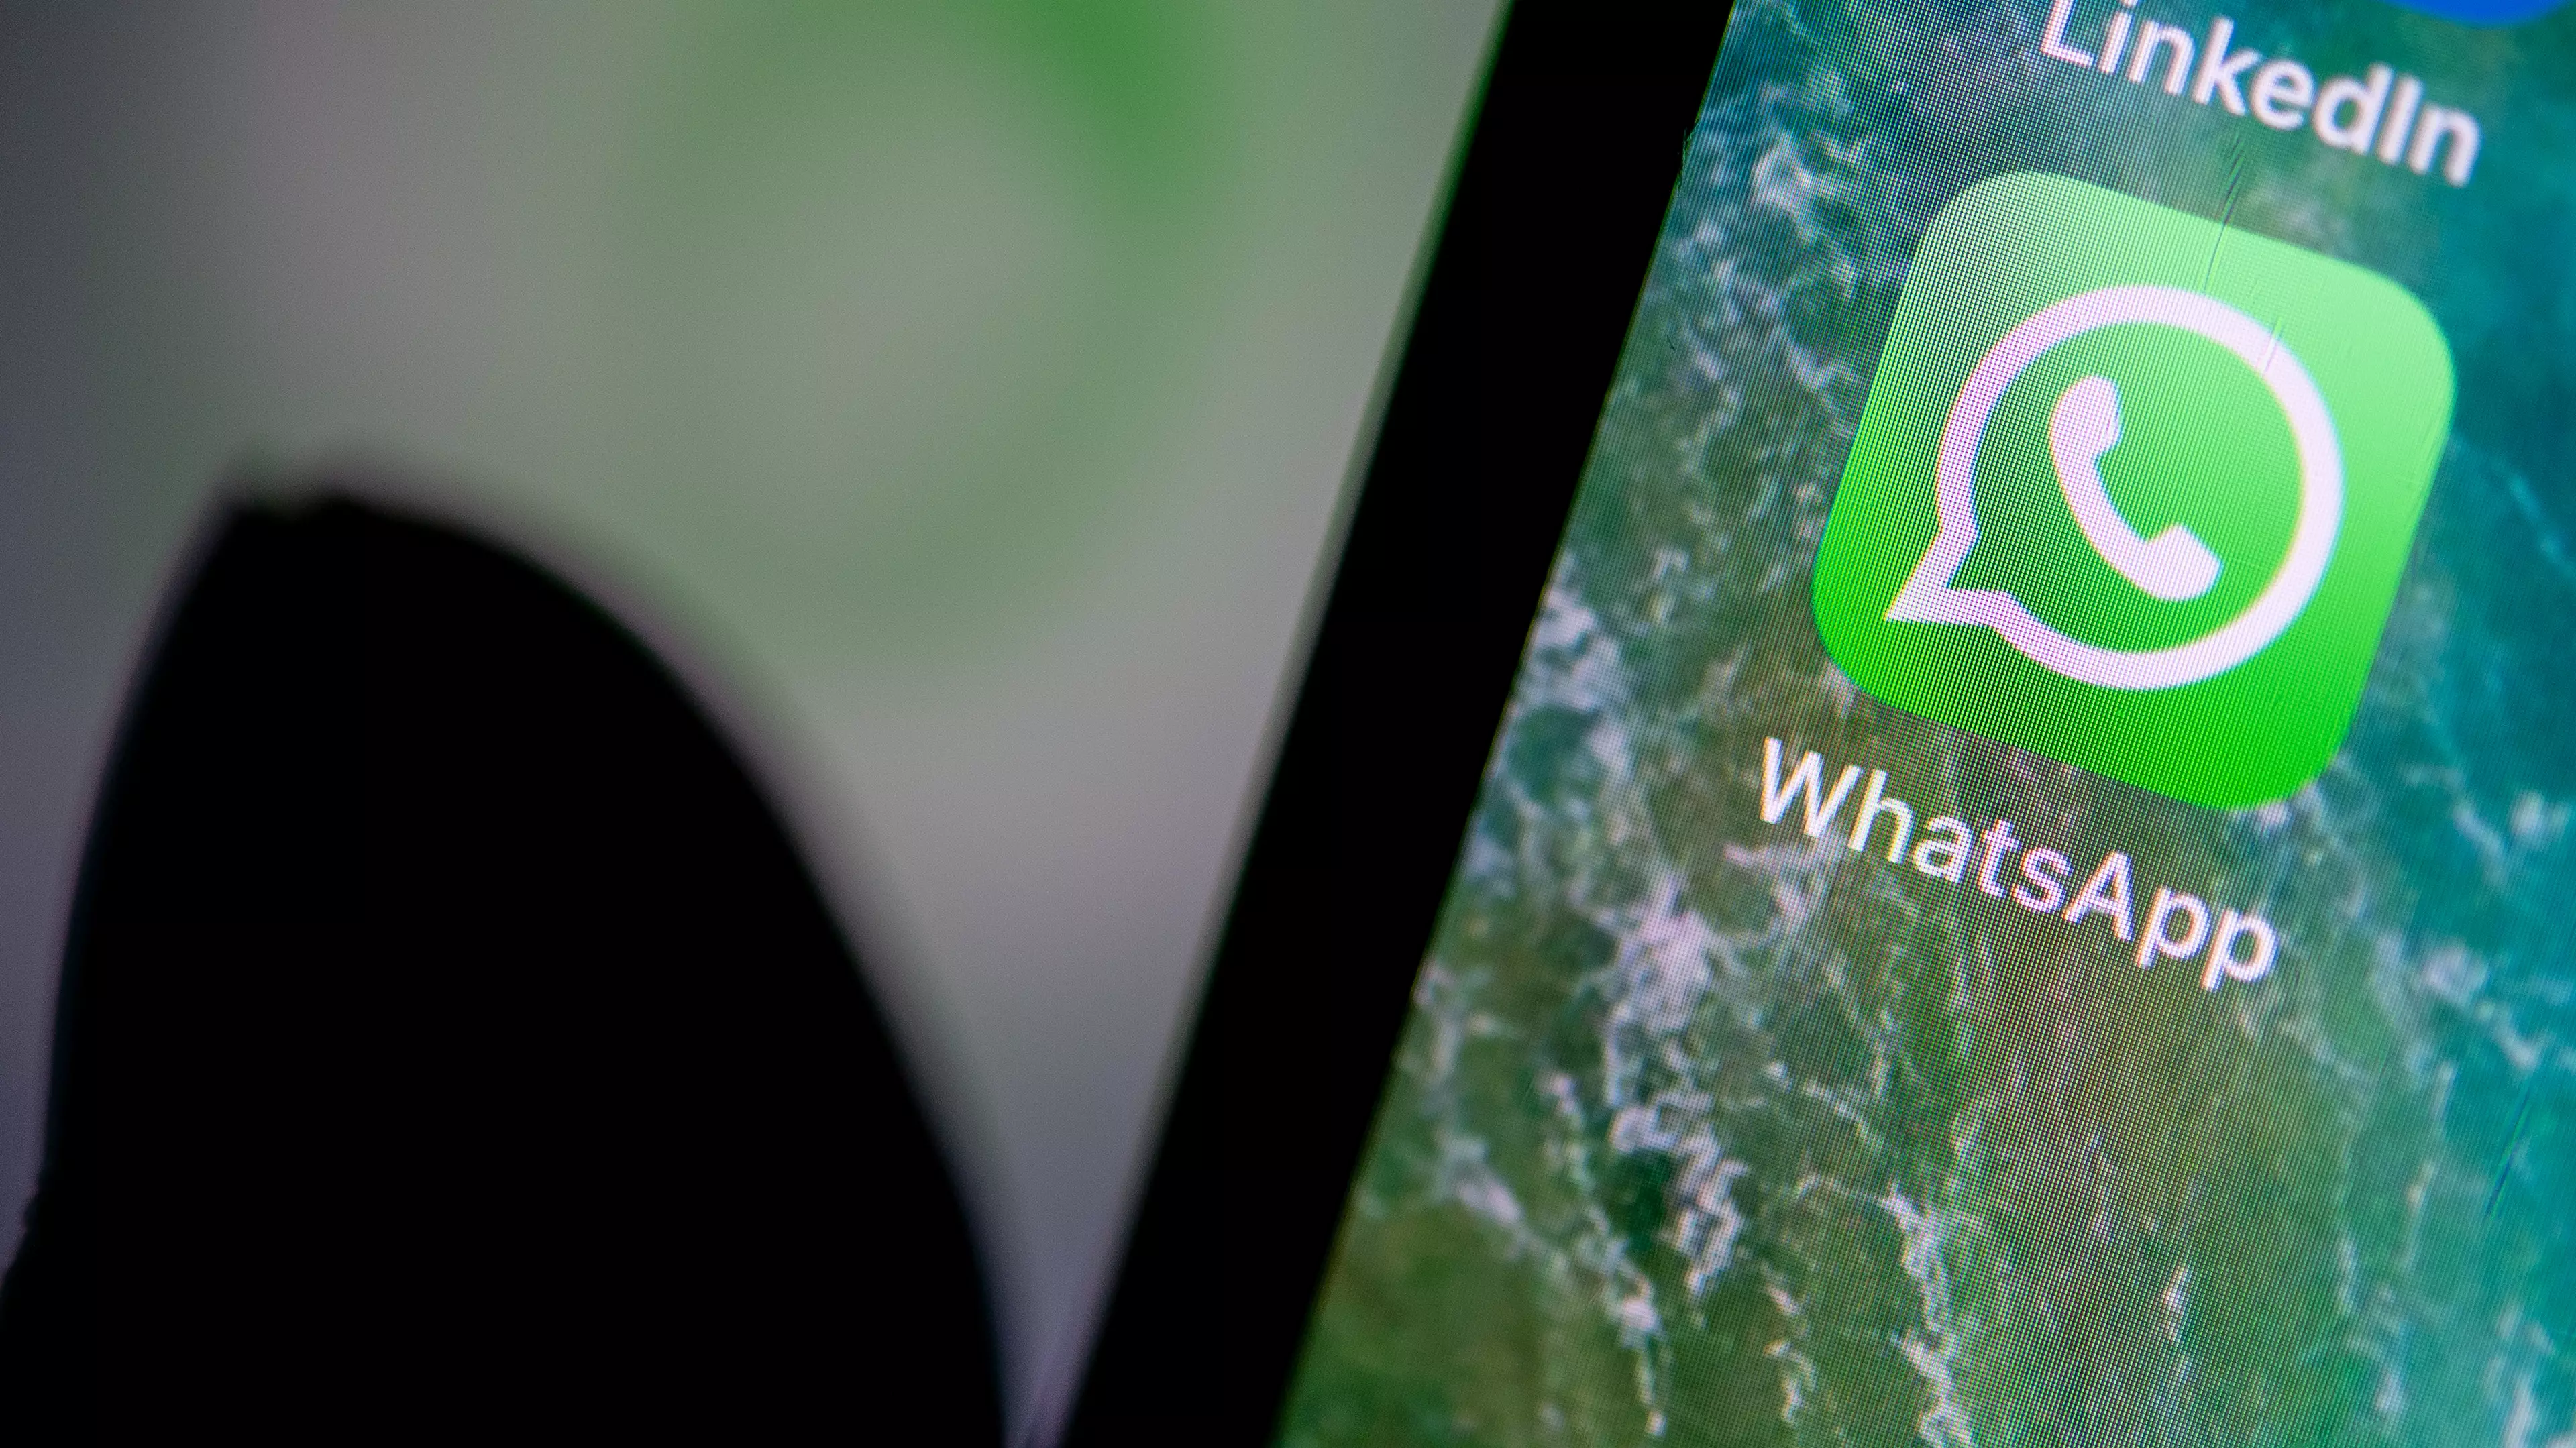 WhatsApp Is Going To Let You Send Self-Destructing Messages